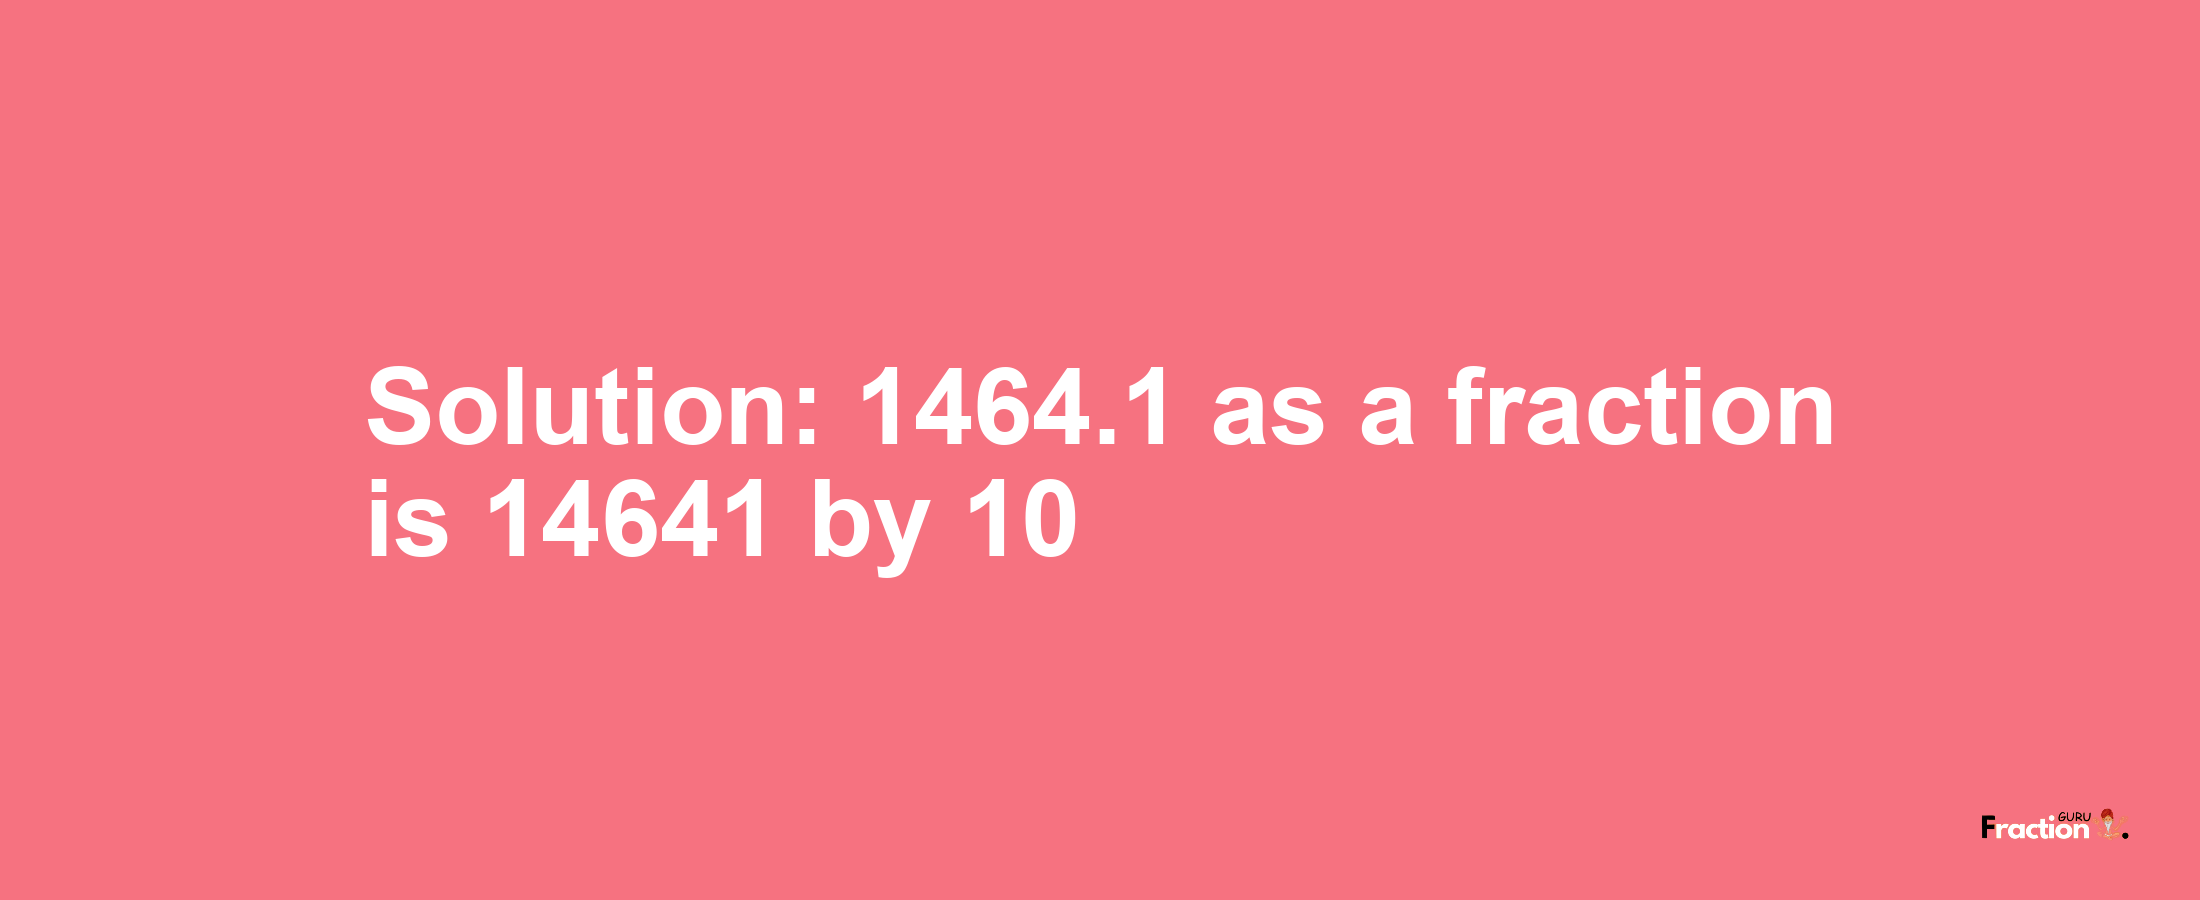 Solution:1464.1 as a fraction is 14641/10